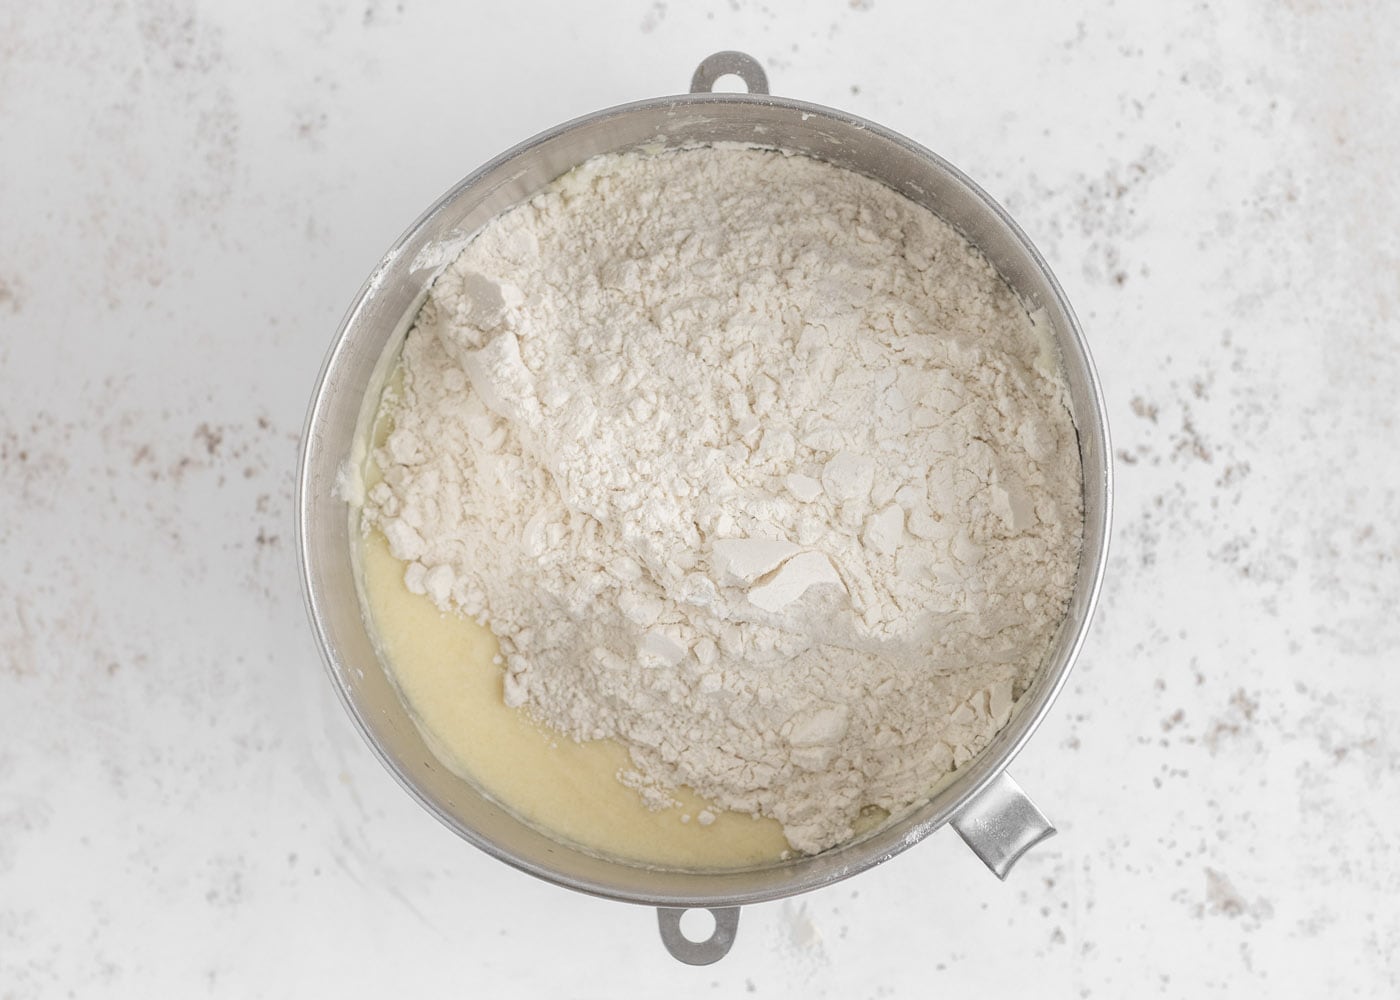 flour mixture added to wet cake batter ingredients